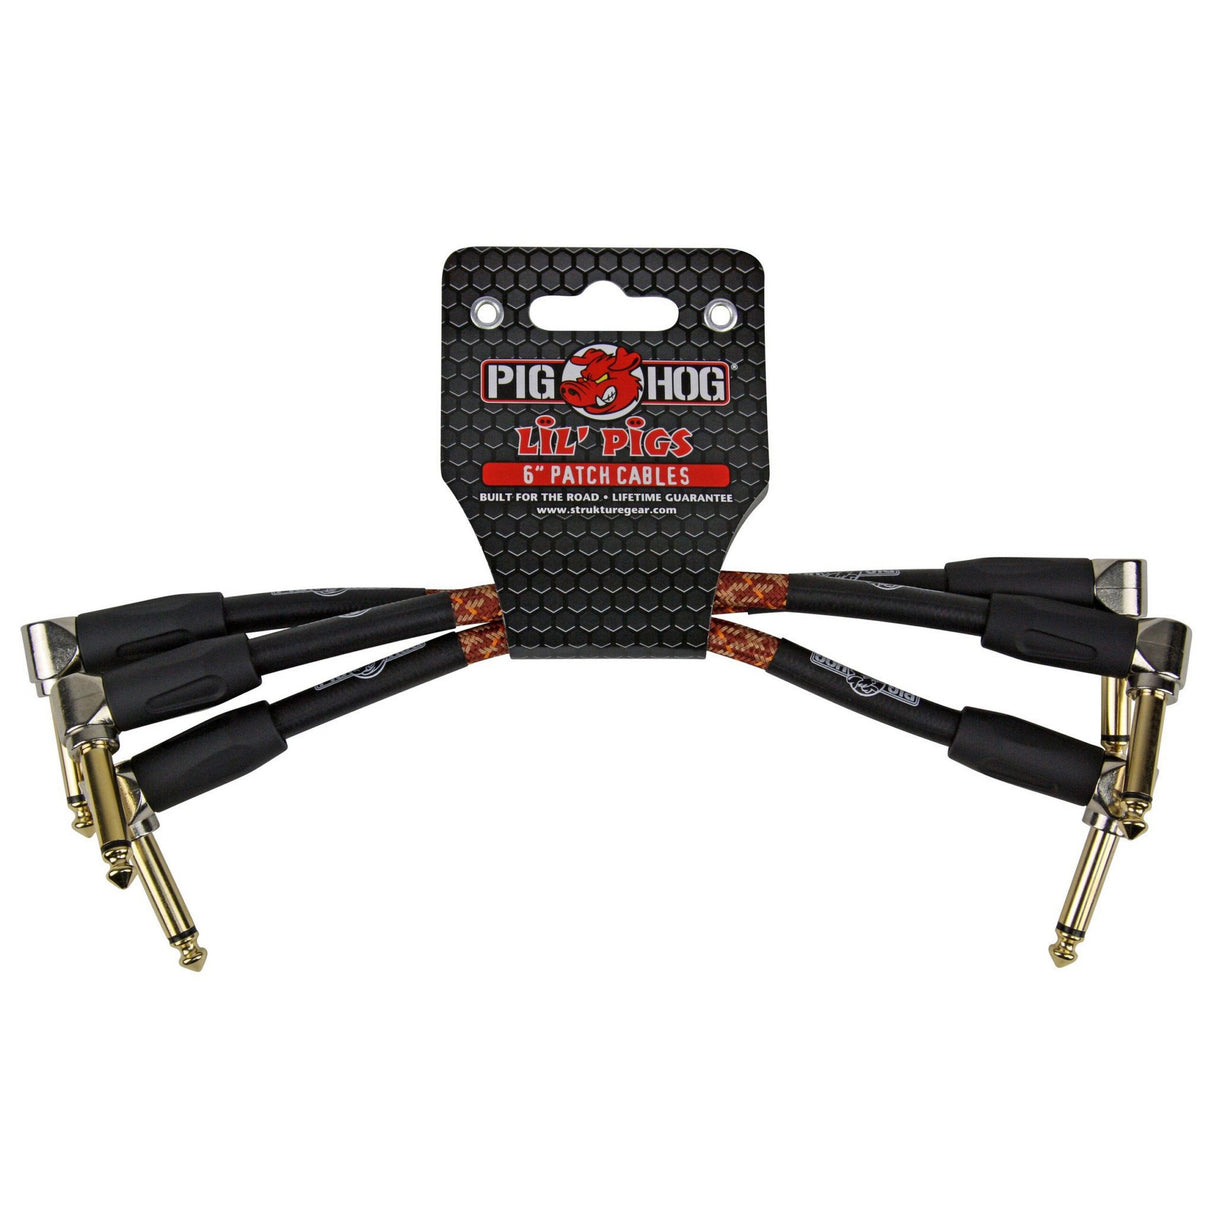 Pig Hog PHLIL6CP "Western Plaid" 6-Inch Patch Cables, 3-Pack